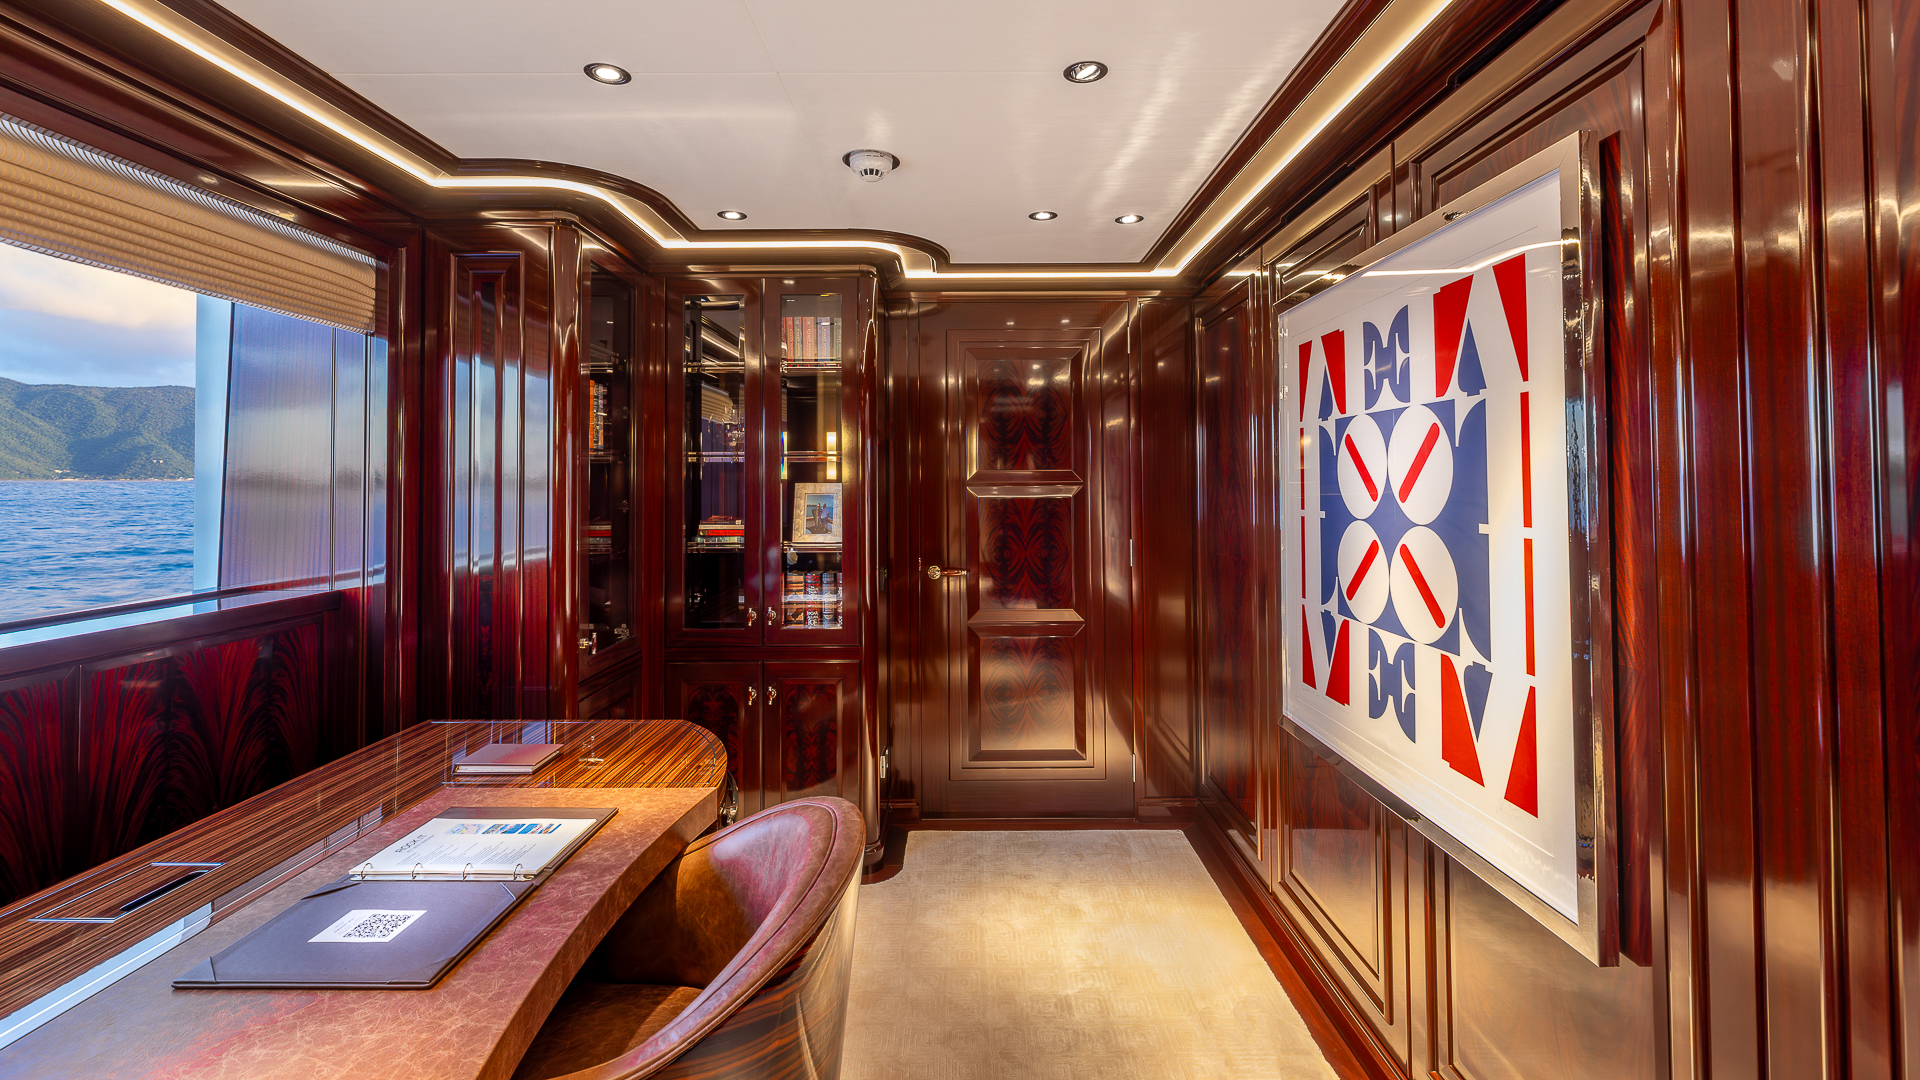 Rock It Master King Suite - Office Credit Yachting Image